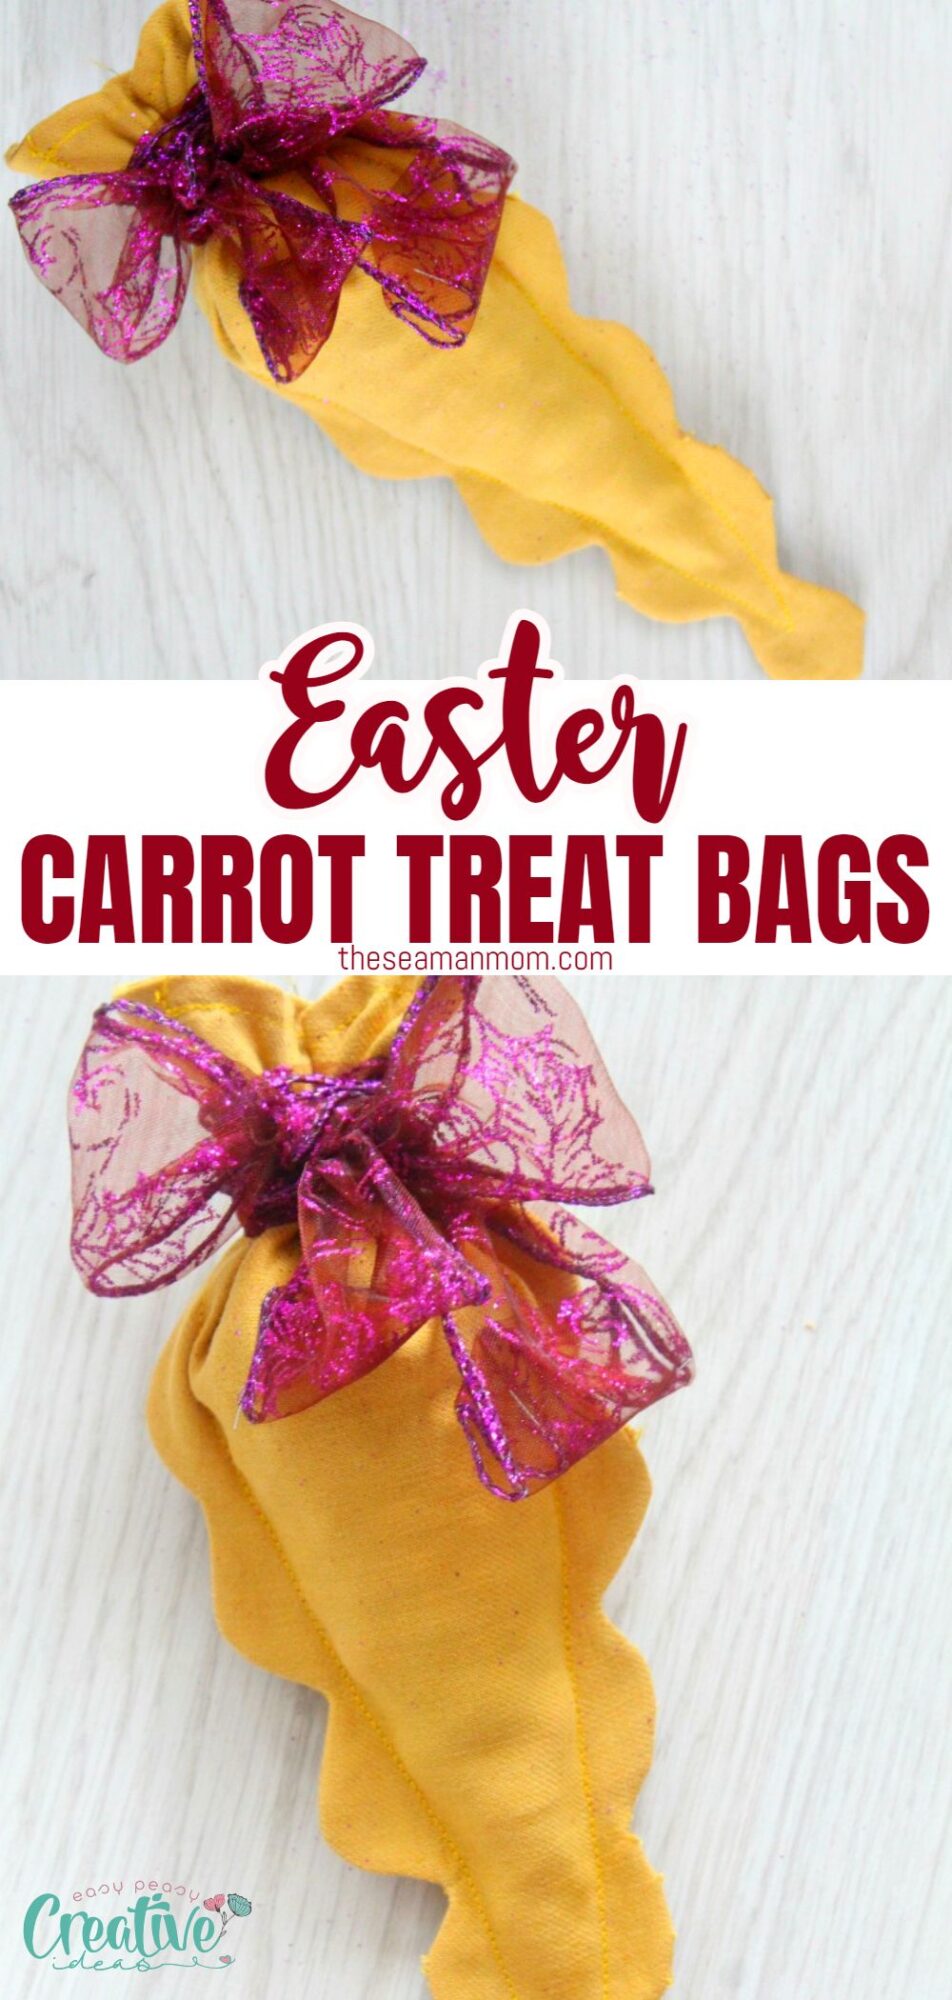 Easter carrot treat bags sewing tutorial